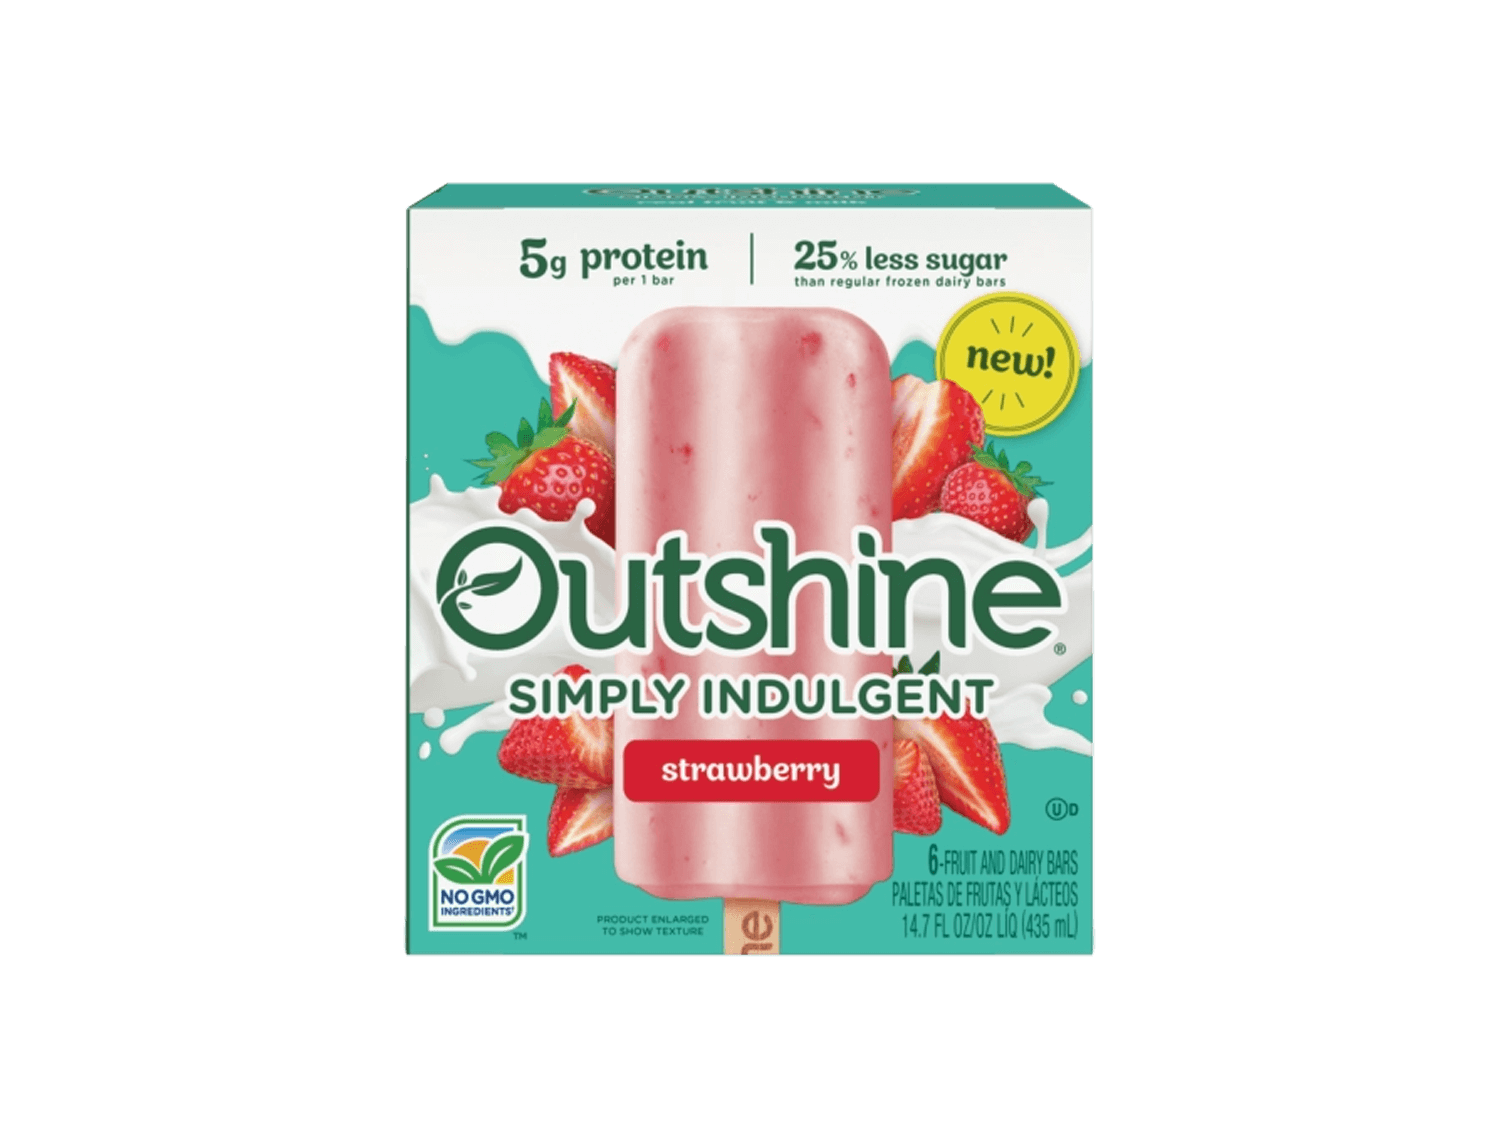 box of Outshine simply indulgent strawberry bars